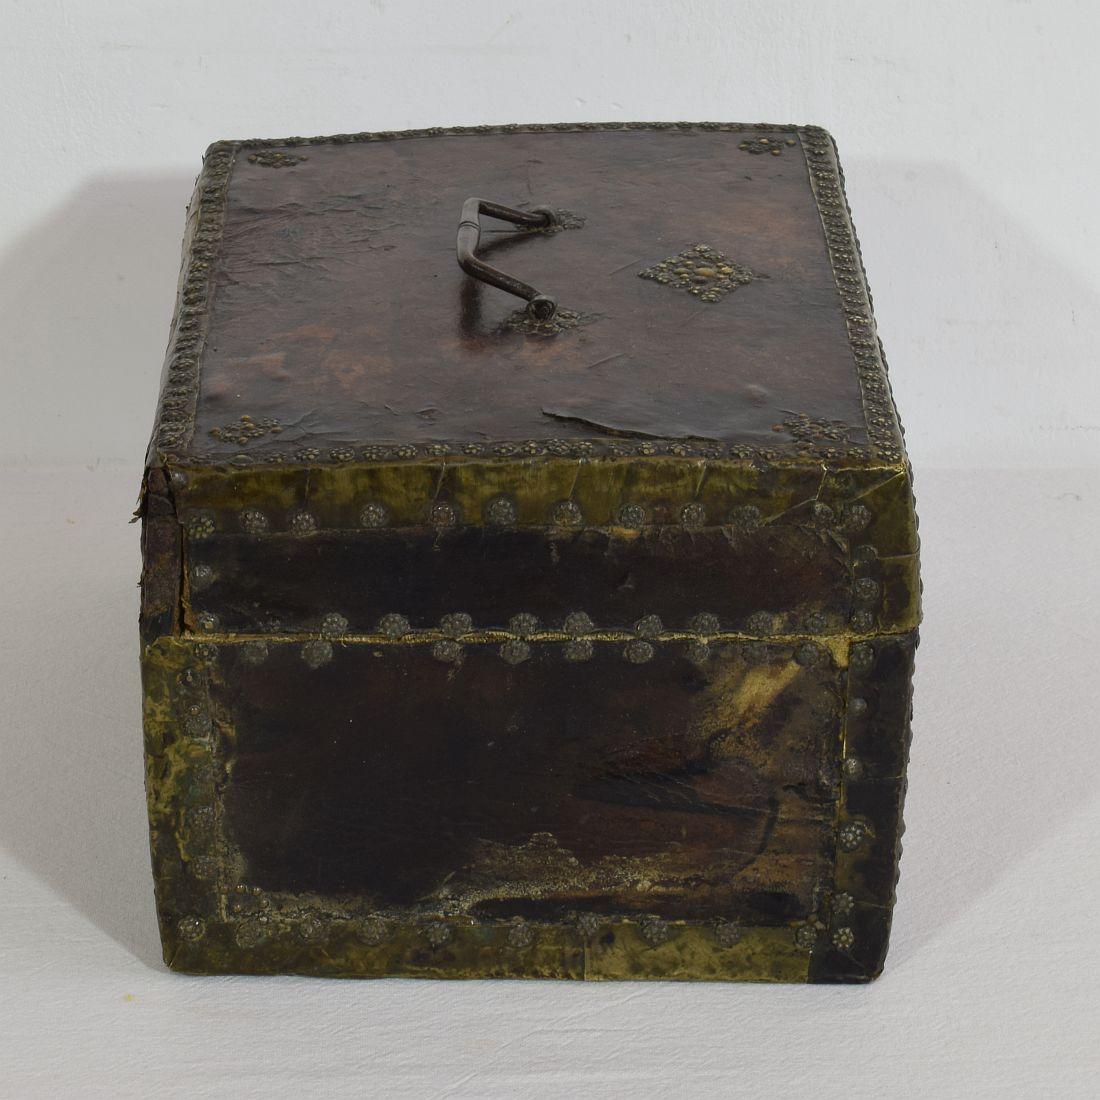 Hand-Crafted Small 17th Century, French Coffer or Box in Leather